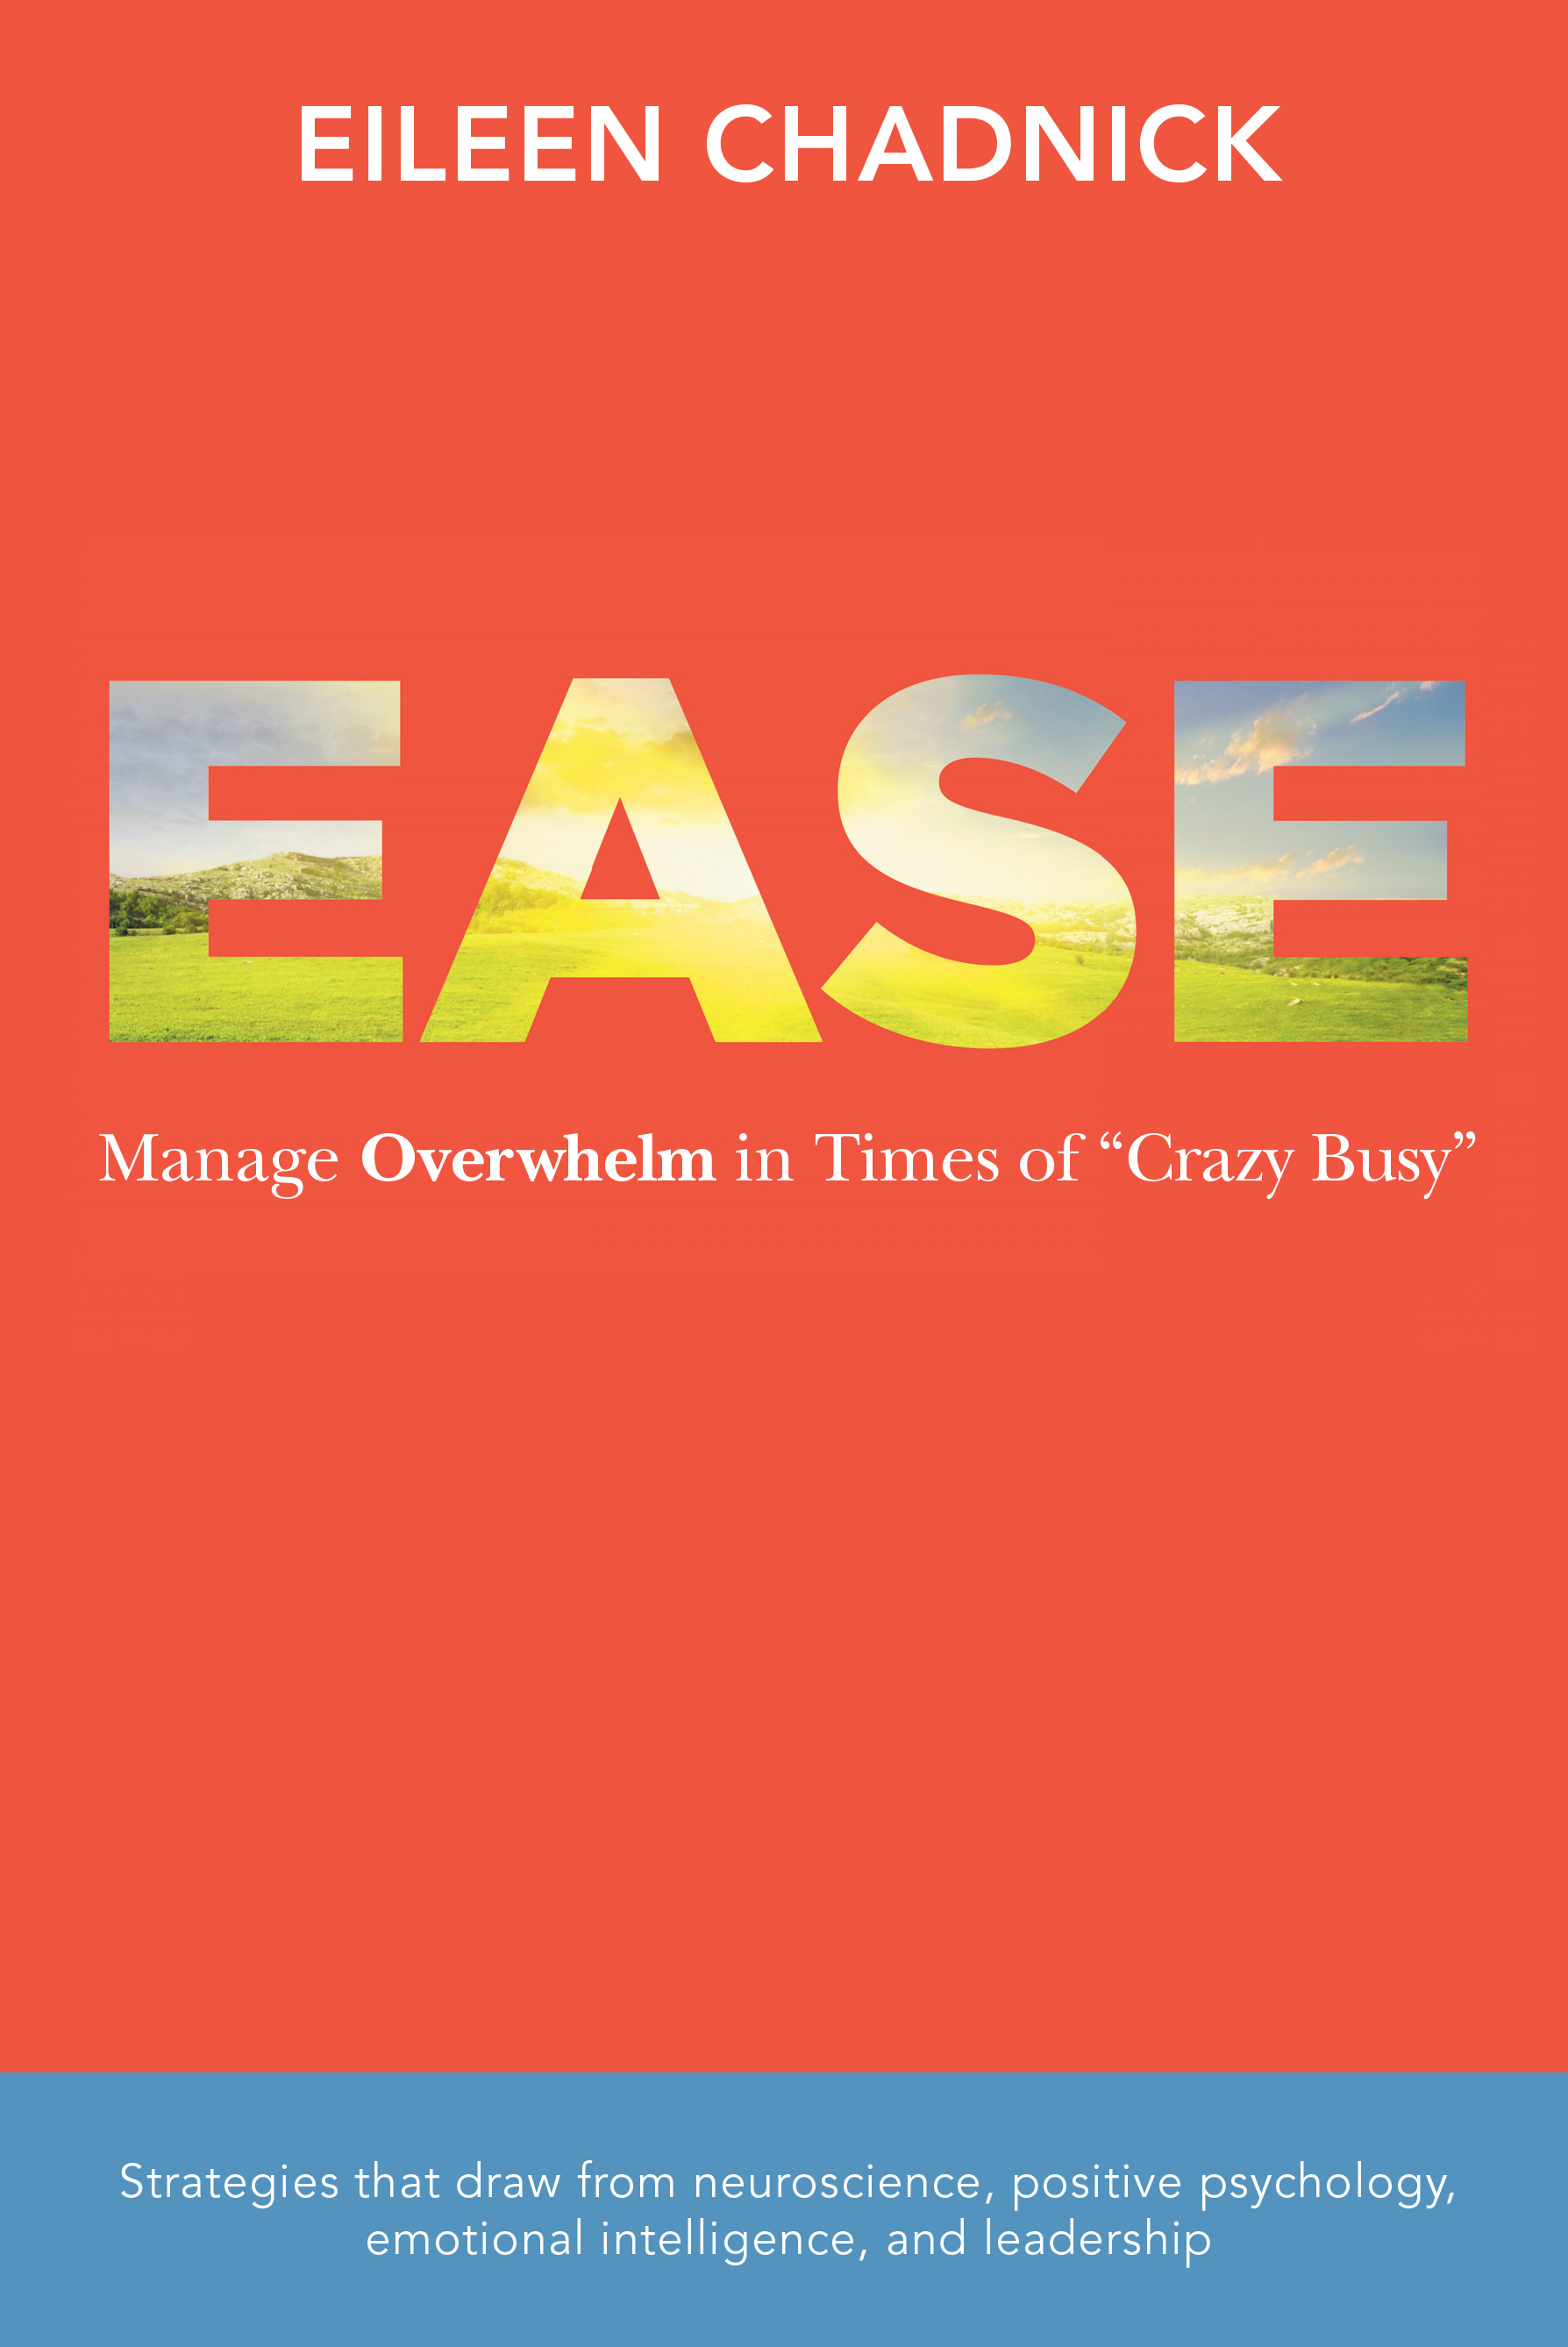 (Webinar – free): Finding Ease in Times of “Crazy Busy”